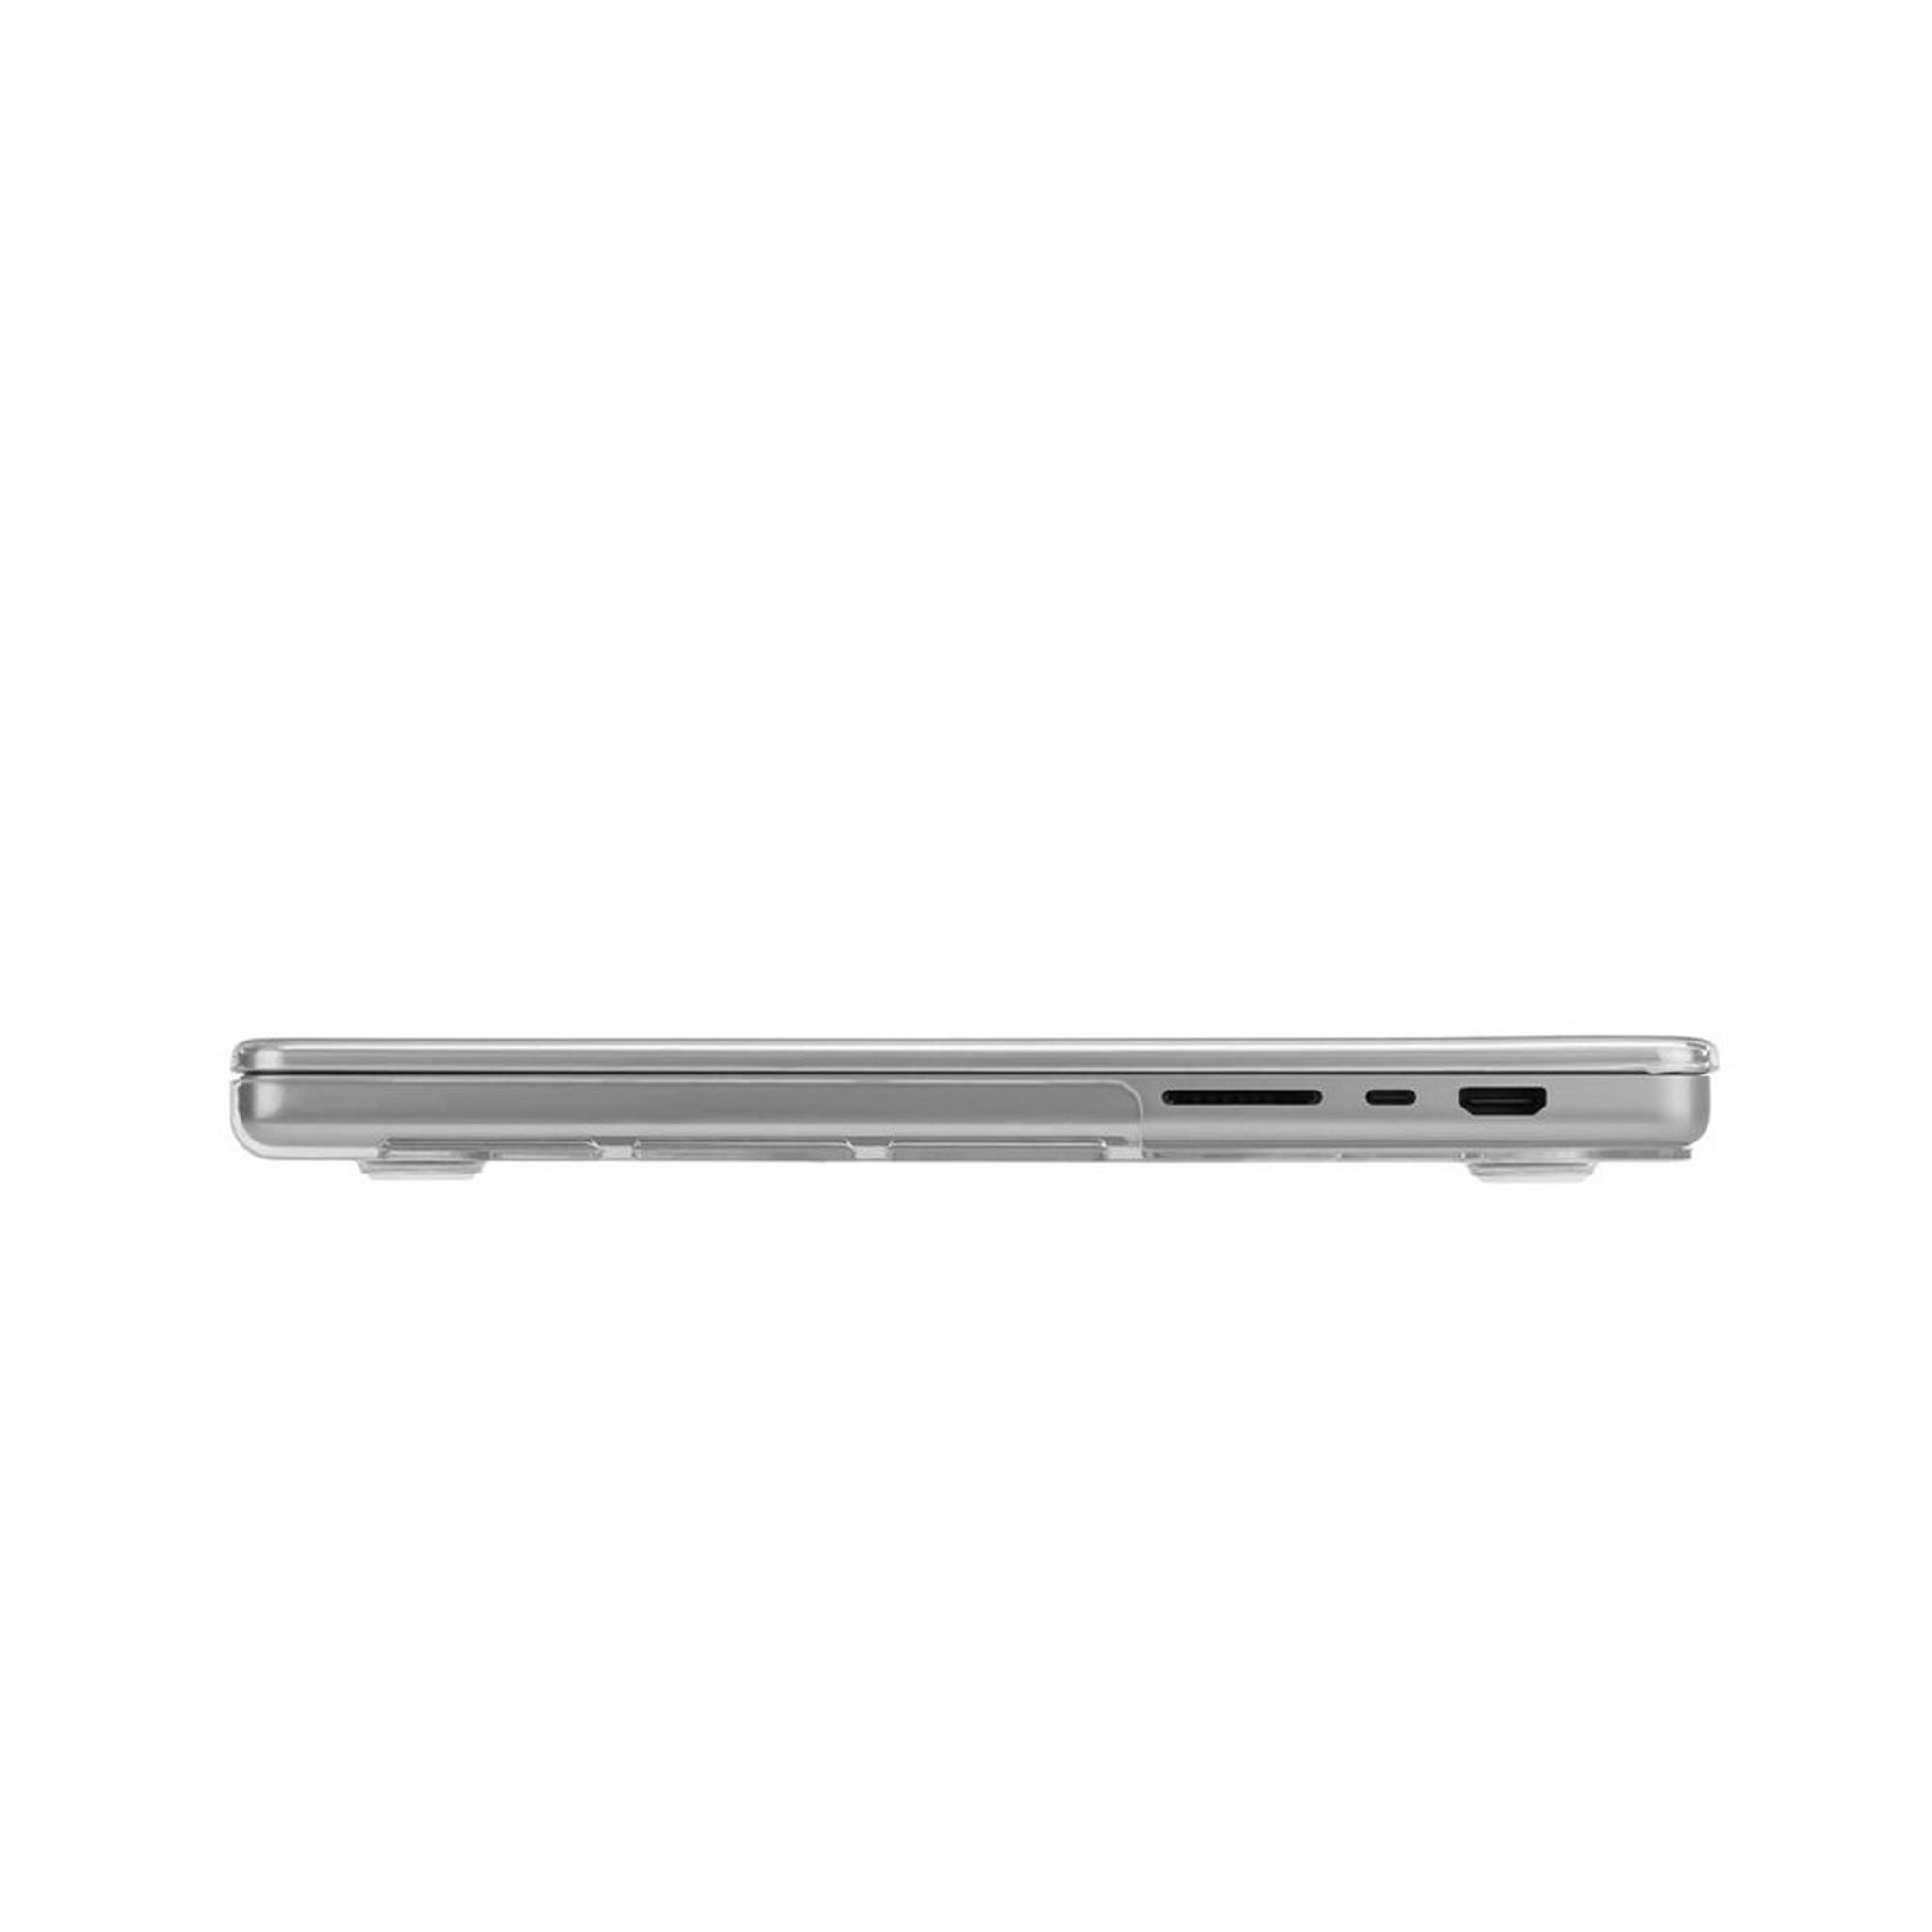 Case Mate Snap-On Case For Macbook Pro 2021 14-inch, CM-CM048522 - Clear